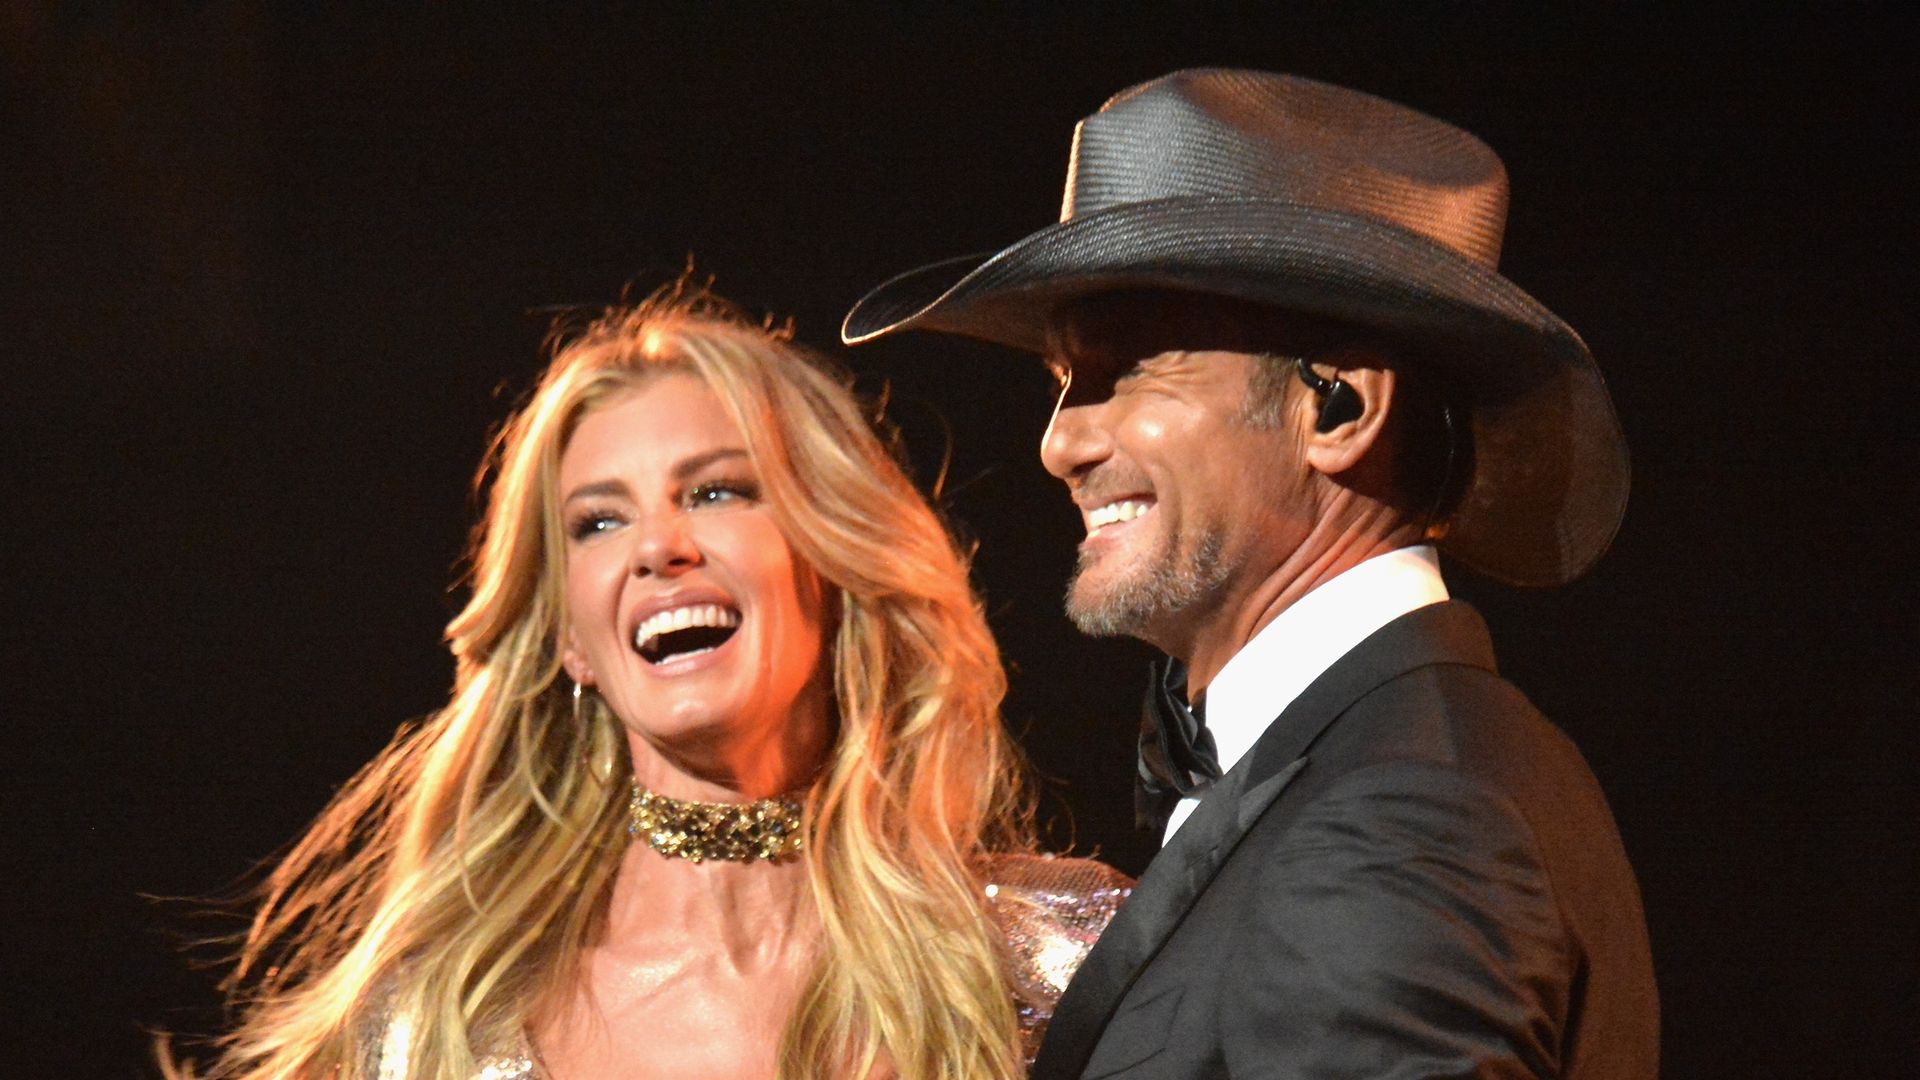 Faith Hill and Tim McGraw perform onstage at the 52nd Academy Of Country Music Awards